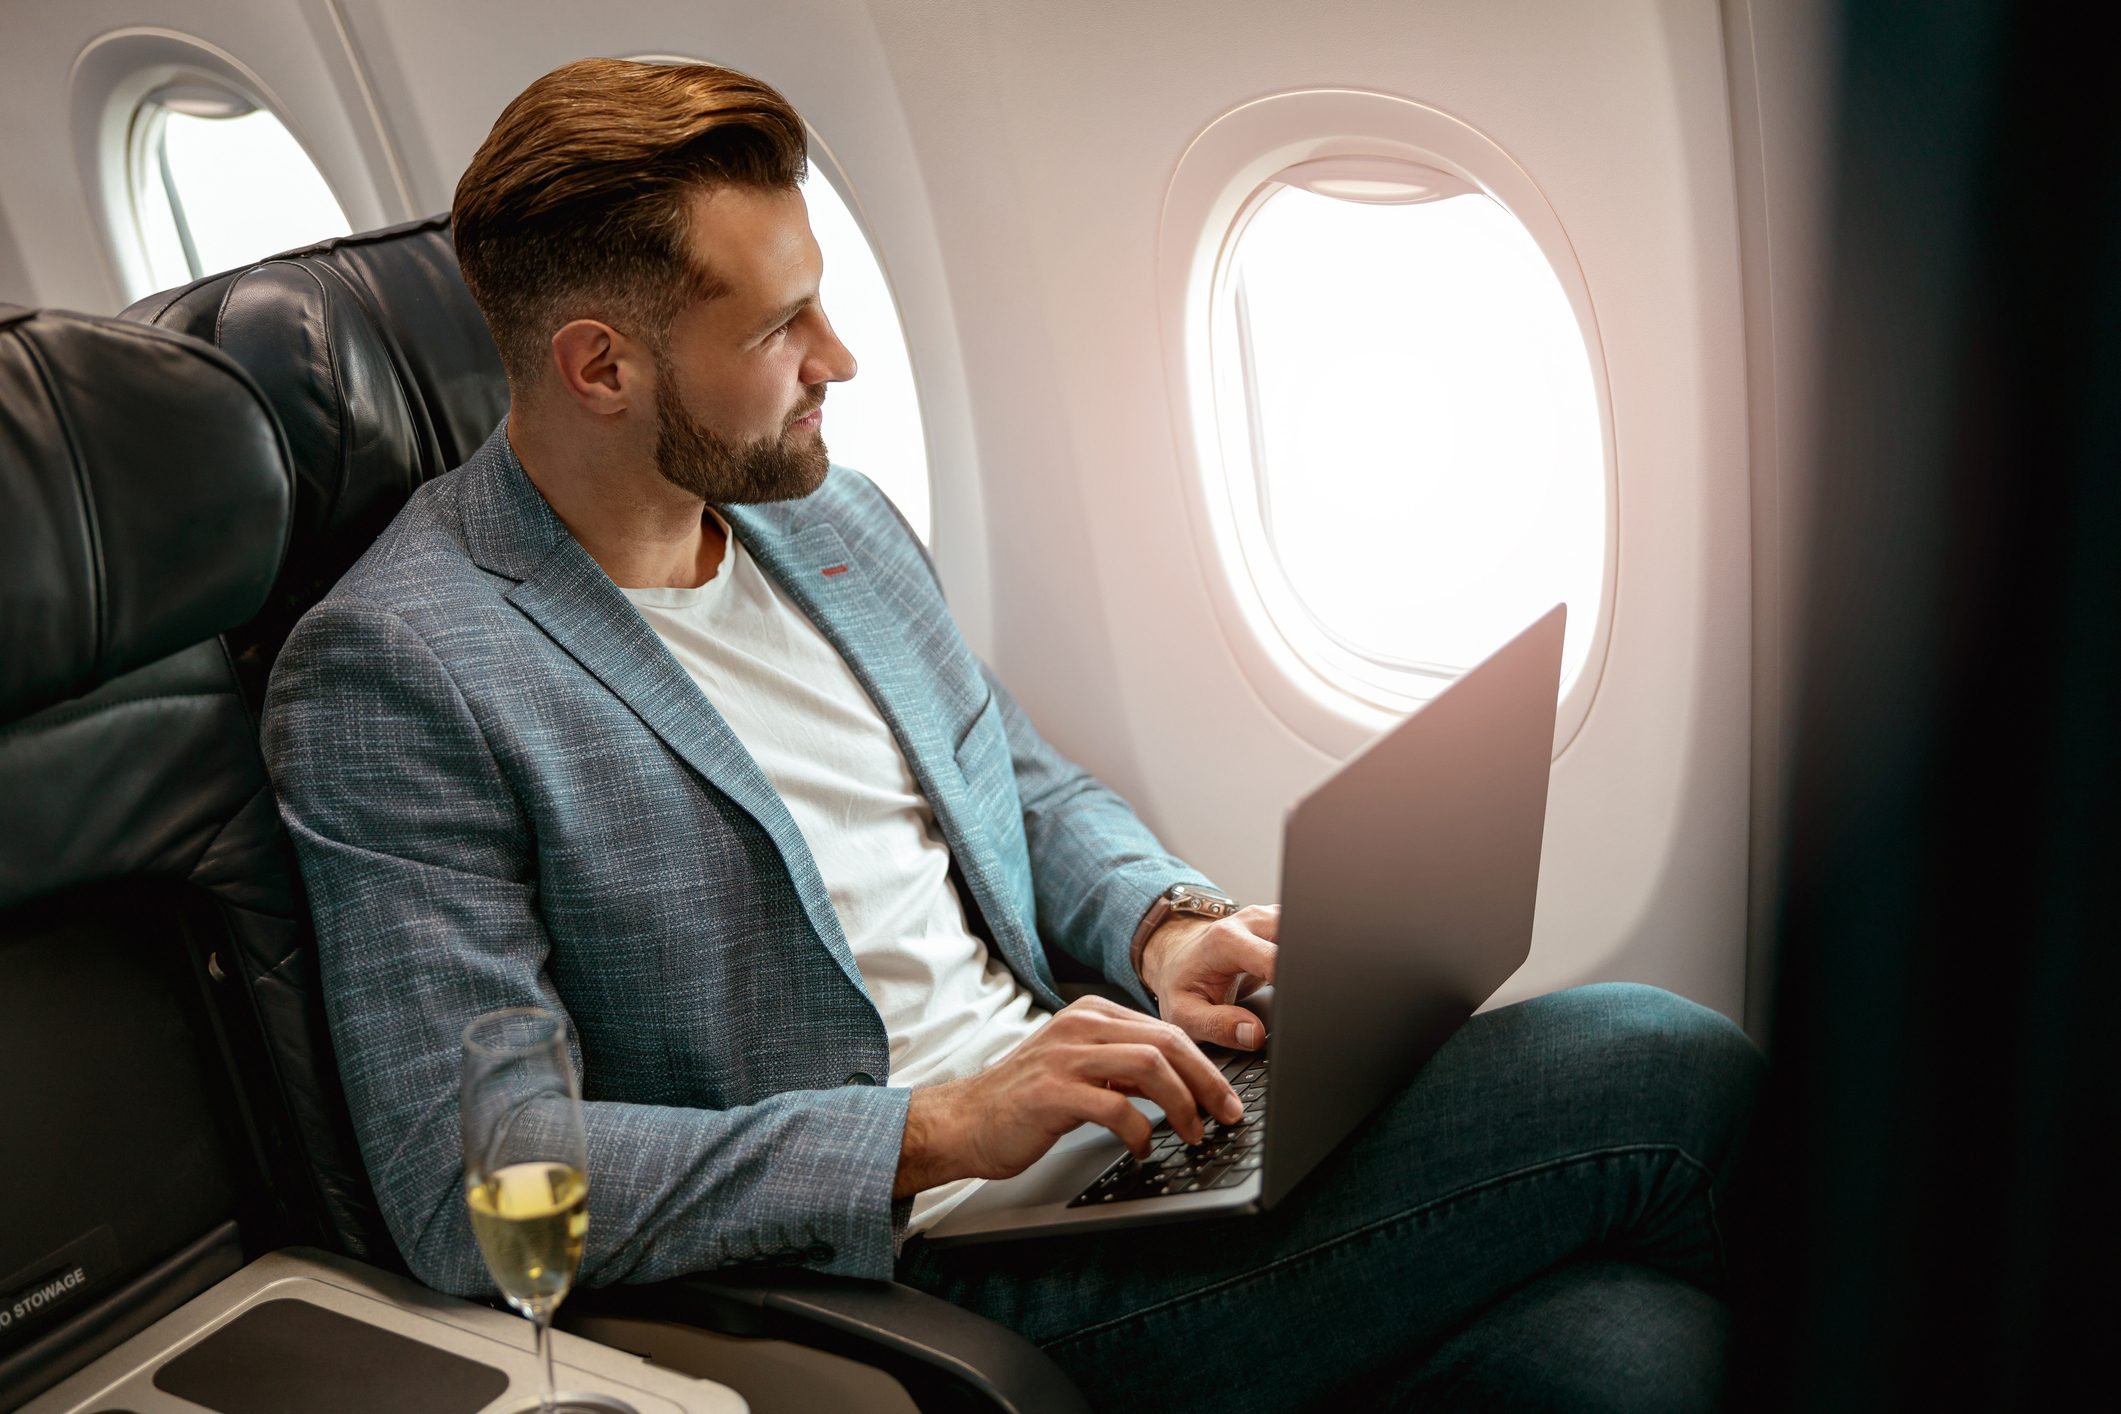 <p>If you're traveling for business, you can save time and reduce stress about what to wear on the plane by dressing in your <a href="https://www.rd.com/article/business-casual/">work outfit</a> before you get on the flight. "It's easy now to find business-looking yoga or stretchy pants and blazers for both men and women," says Caris. "If you have to head straight to the office or a meeting after your flight, it's not ideal to change in the lavatory or an airport bathroom stall. And it's one less thing to worry about, especially if the flight gets delayed."</p> <p><strong>Shop business casual pieces:</strong></p> <ul> <li><a href="https://www.amazon.com/Boston-Proper-Beyond-Travel-Boyfriend/dp/B09V6R1HLW" rel="noopener">Boston Proper Beyond Travel Boyfriend Blazer</a></li> <li><a href="https://www.amazon.com/Marycrafts-Womens-Stretch-Dress-Business/dp/B07ZK9HRL7" rel="noopener">Marycrafts Pull-On Stretch Yoga Dress Pants</a></li> <li><a href="https://www.mizzenandmain.com/products/red-navy-multi-check#img4" rel="noopener">Mizzen+Main Men's Leeward Dress Shirt</a></li> </ul>